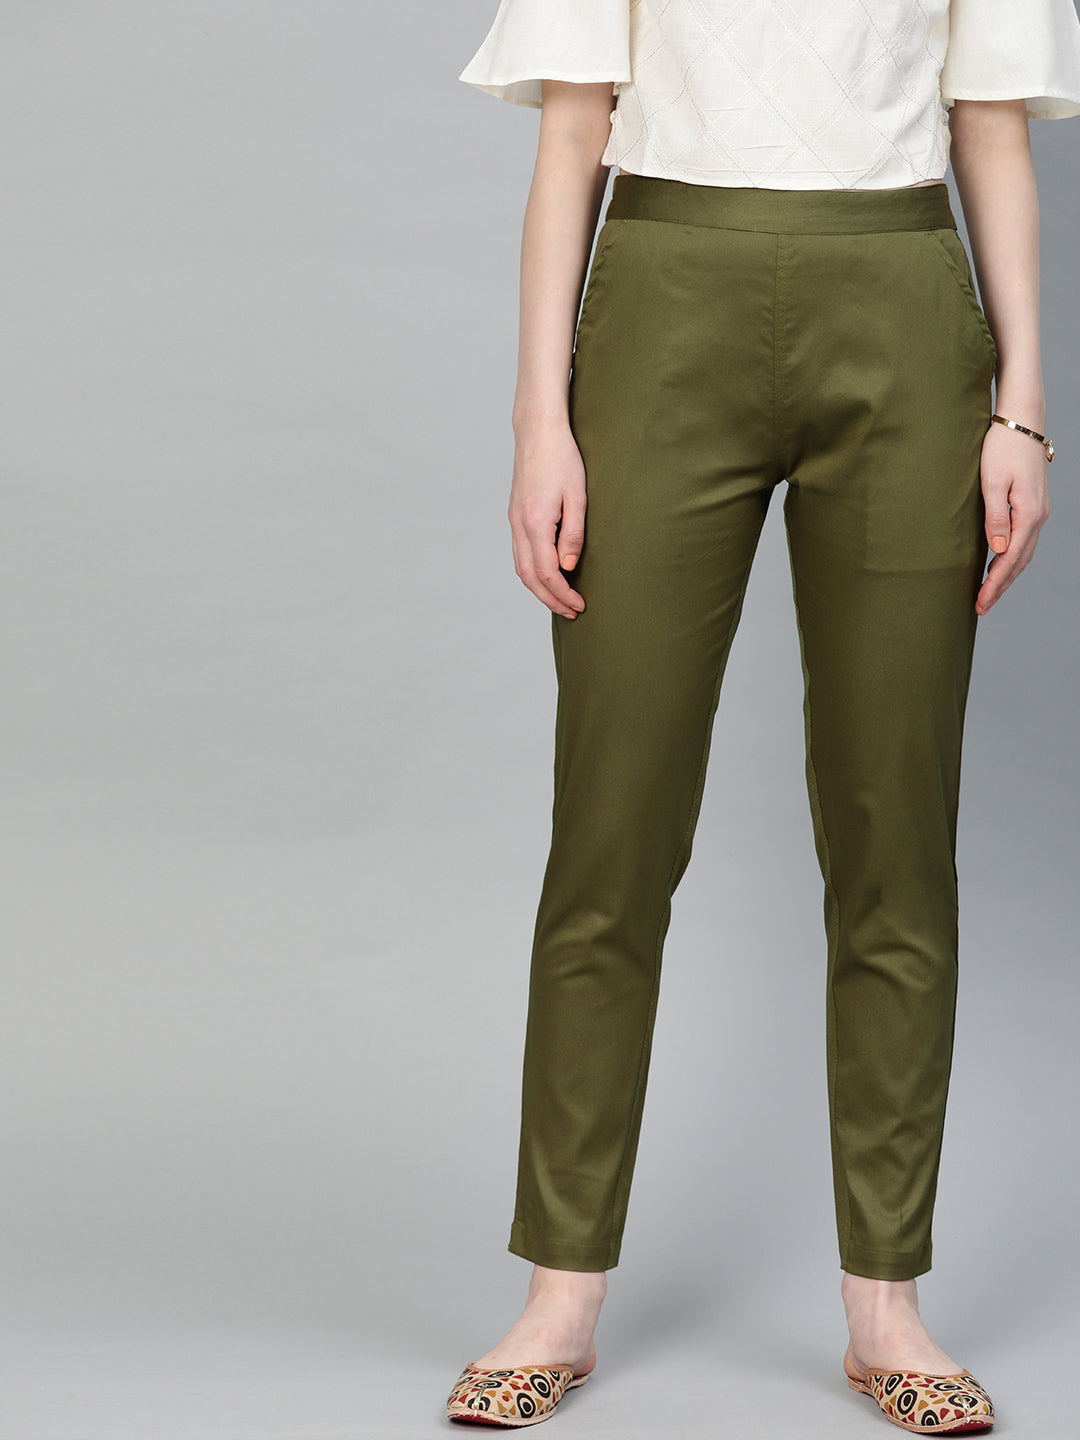 Olive Green Solid Cotton Lycra Pleated Pants